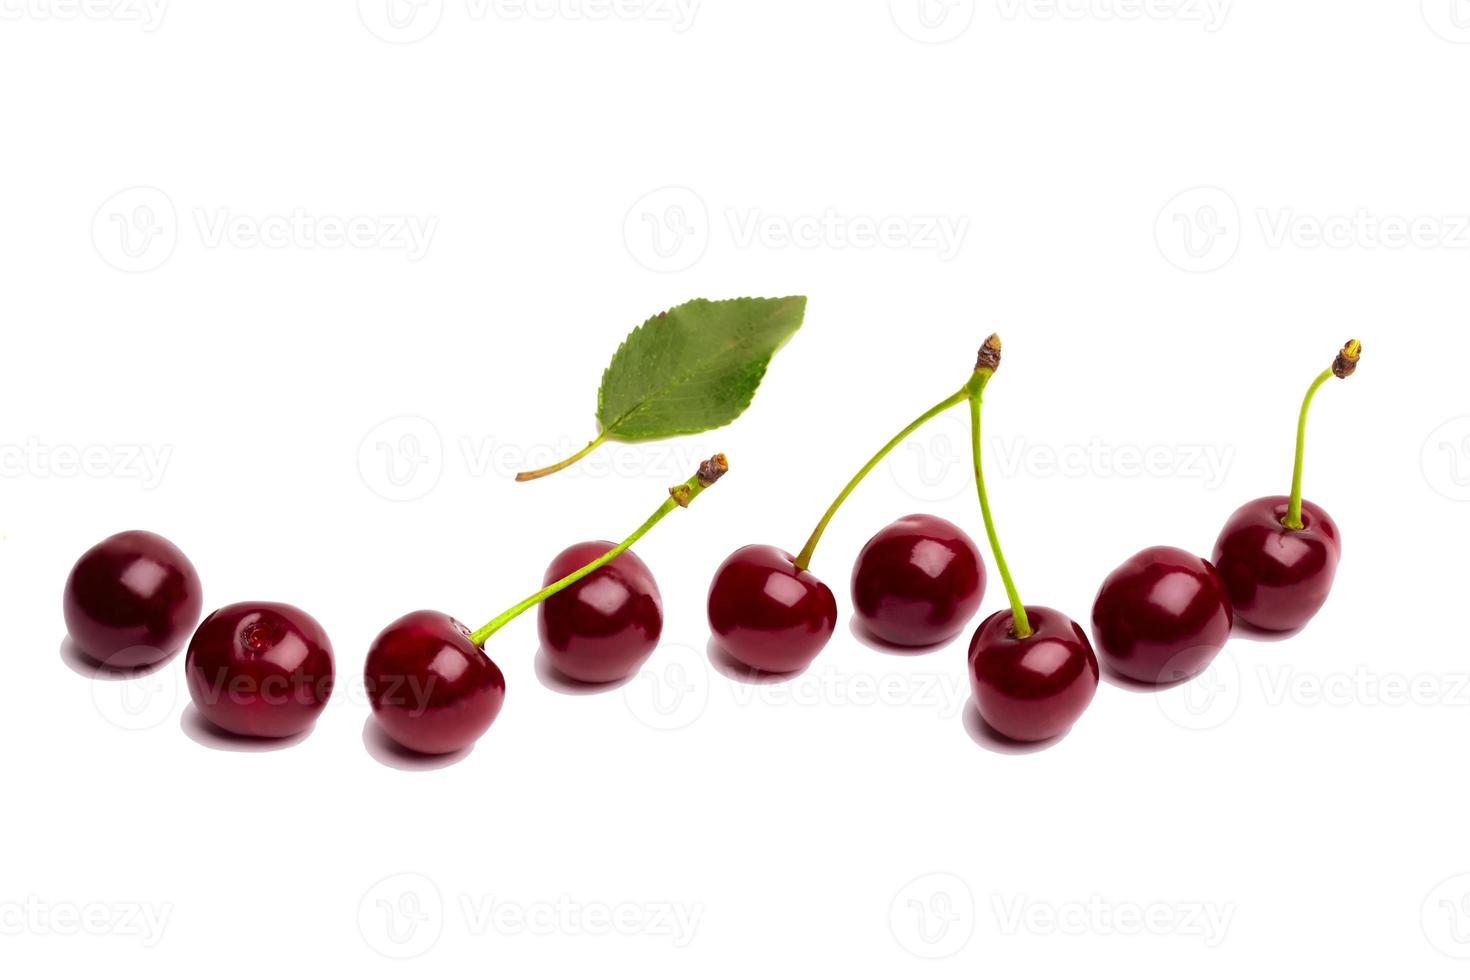 Wishnf isolated on white background. Fresh cherries with green leaves. photo